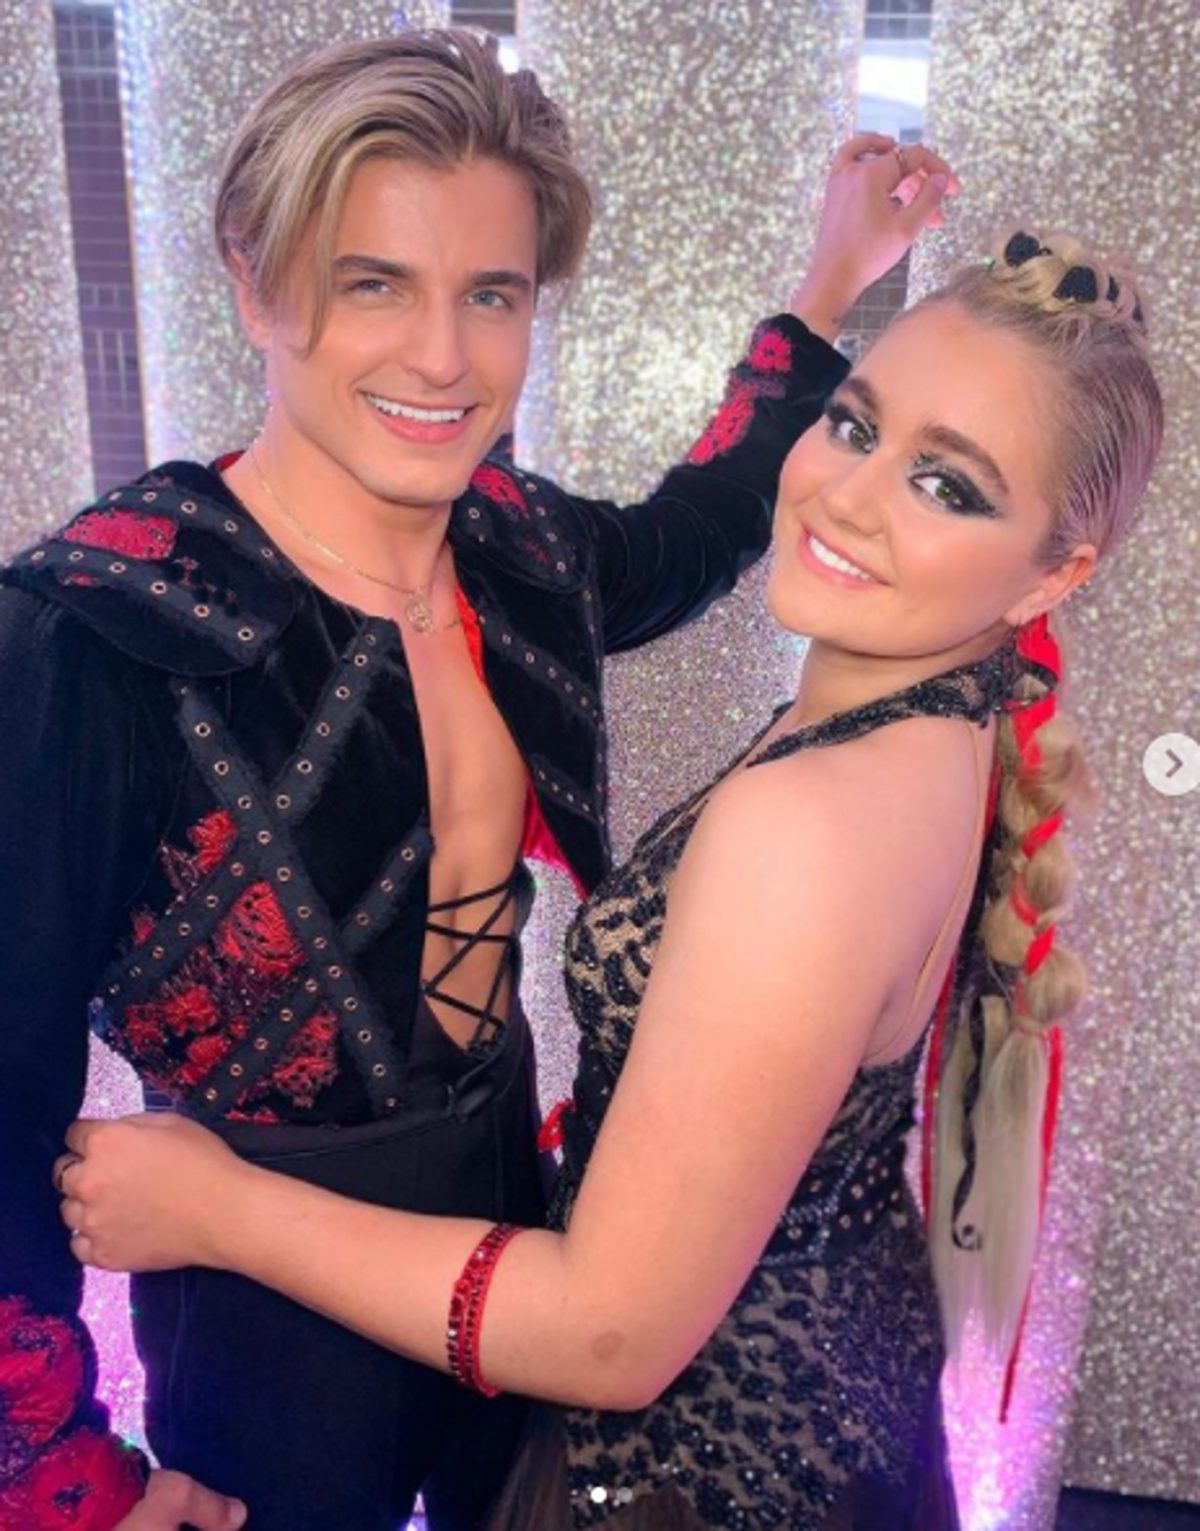 Tilly Ramsay and partner Nikita pose after their Paso Doble